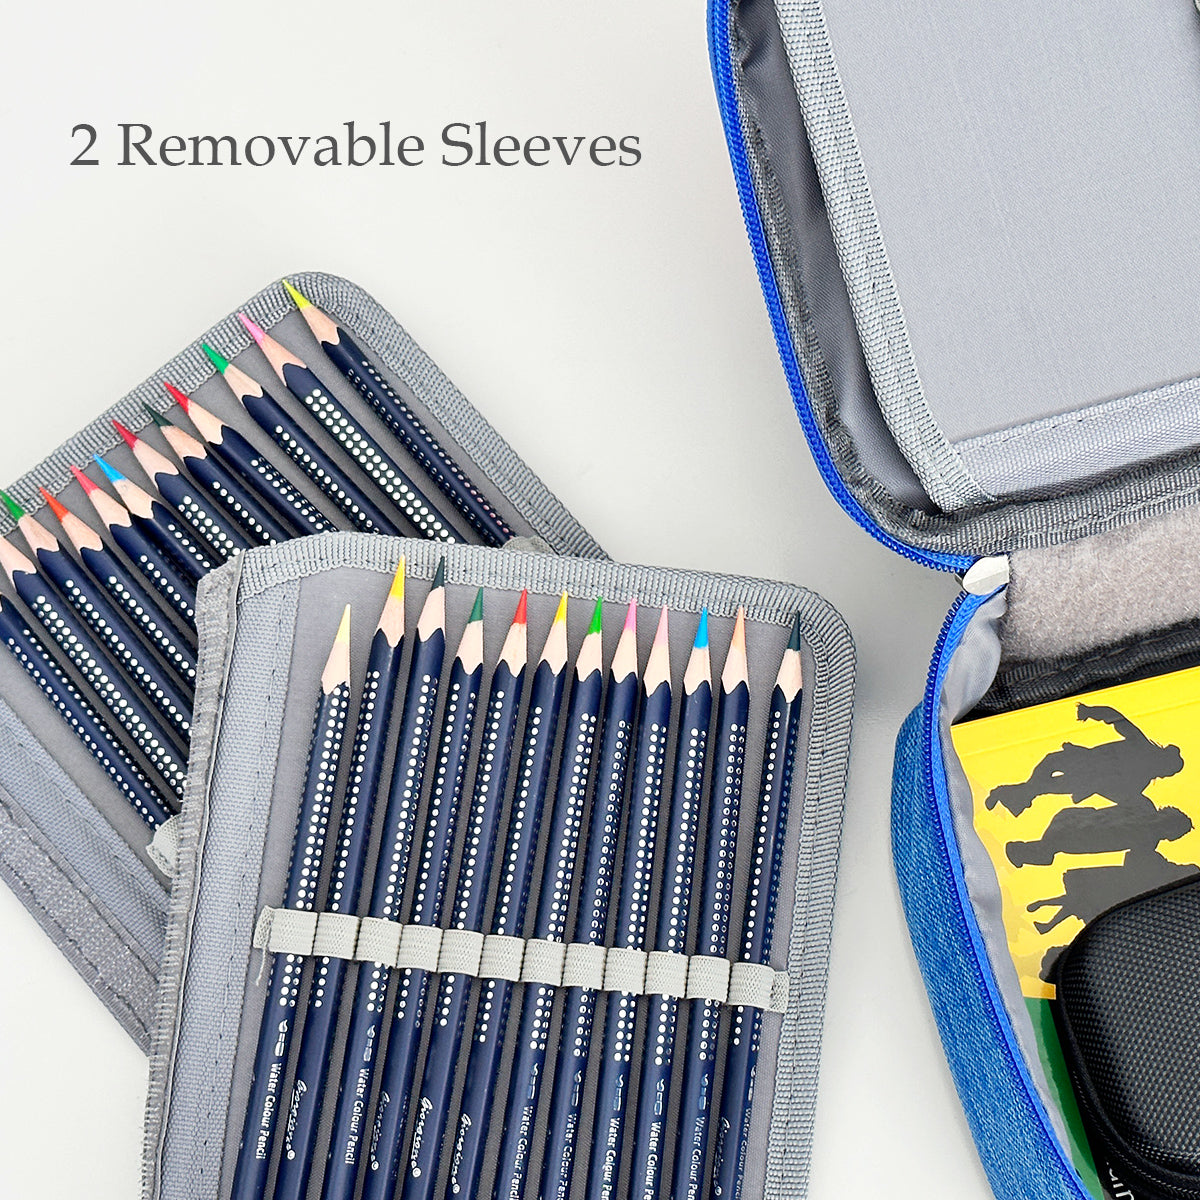 Wrapables Colored Pencils - Yellow Large Pencil Pouch - Yahoo Shopping